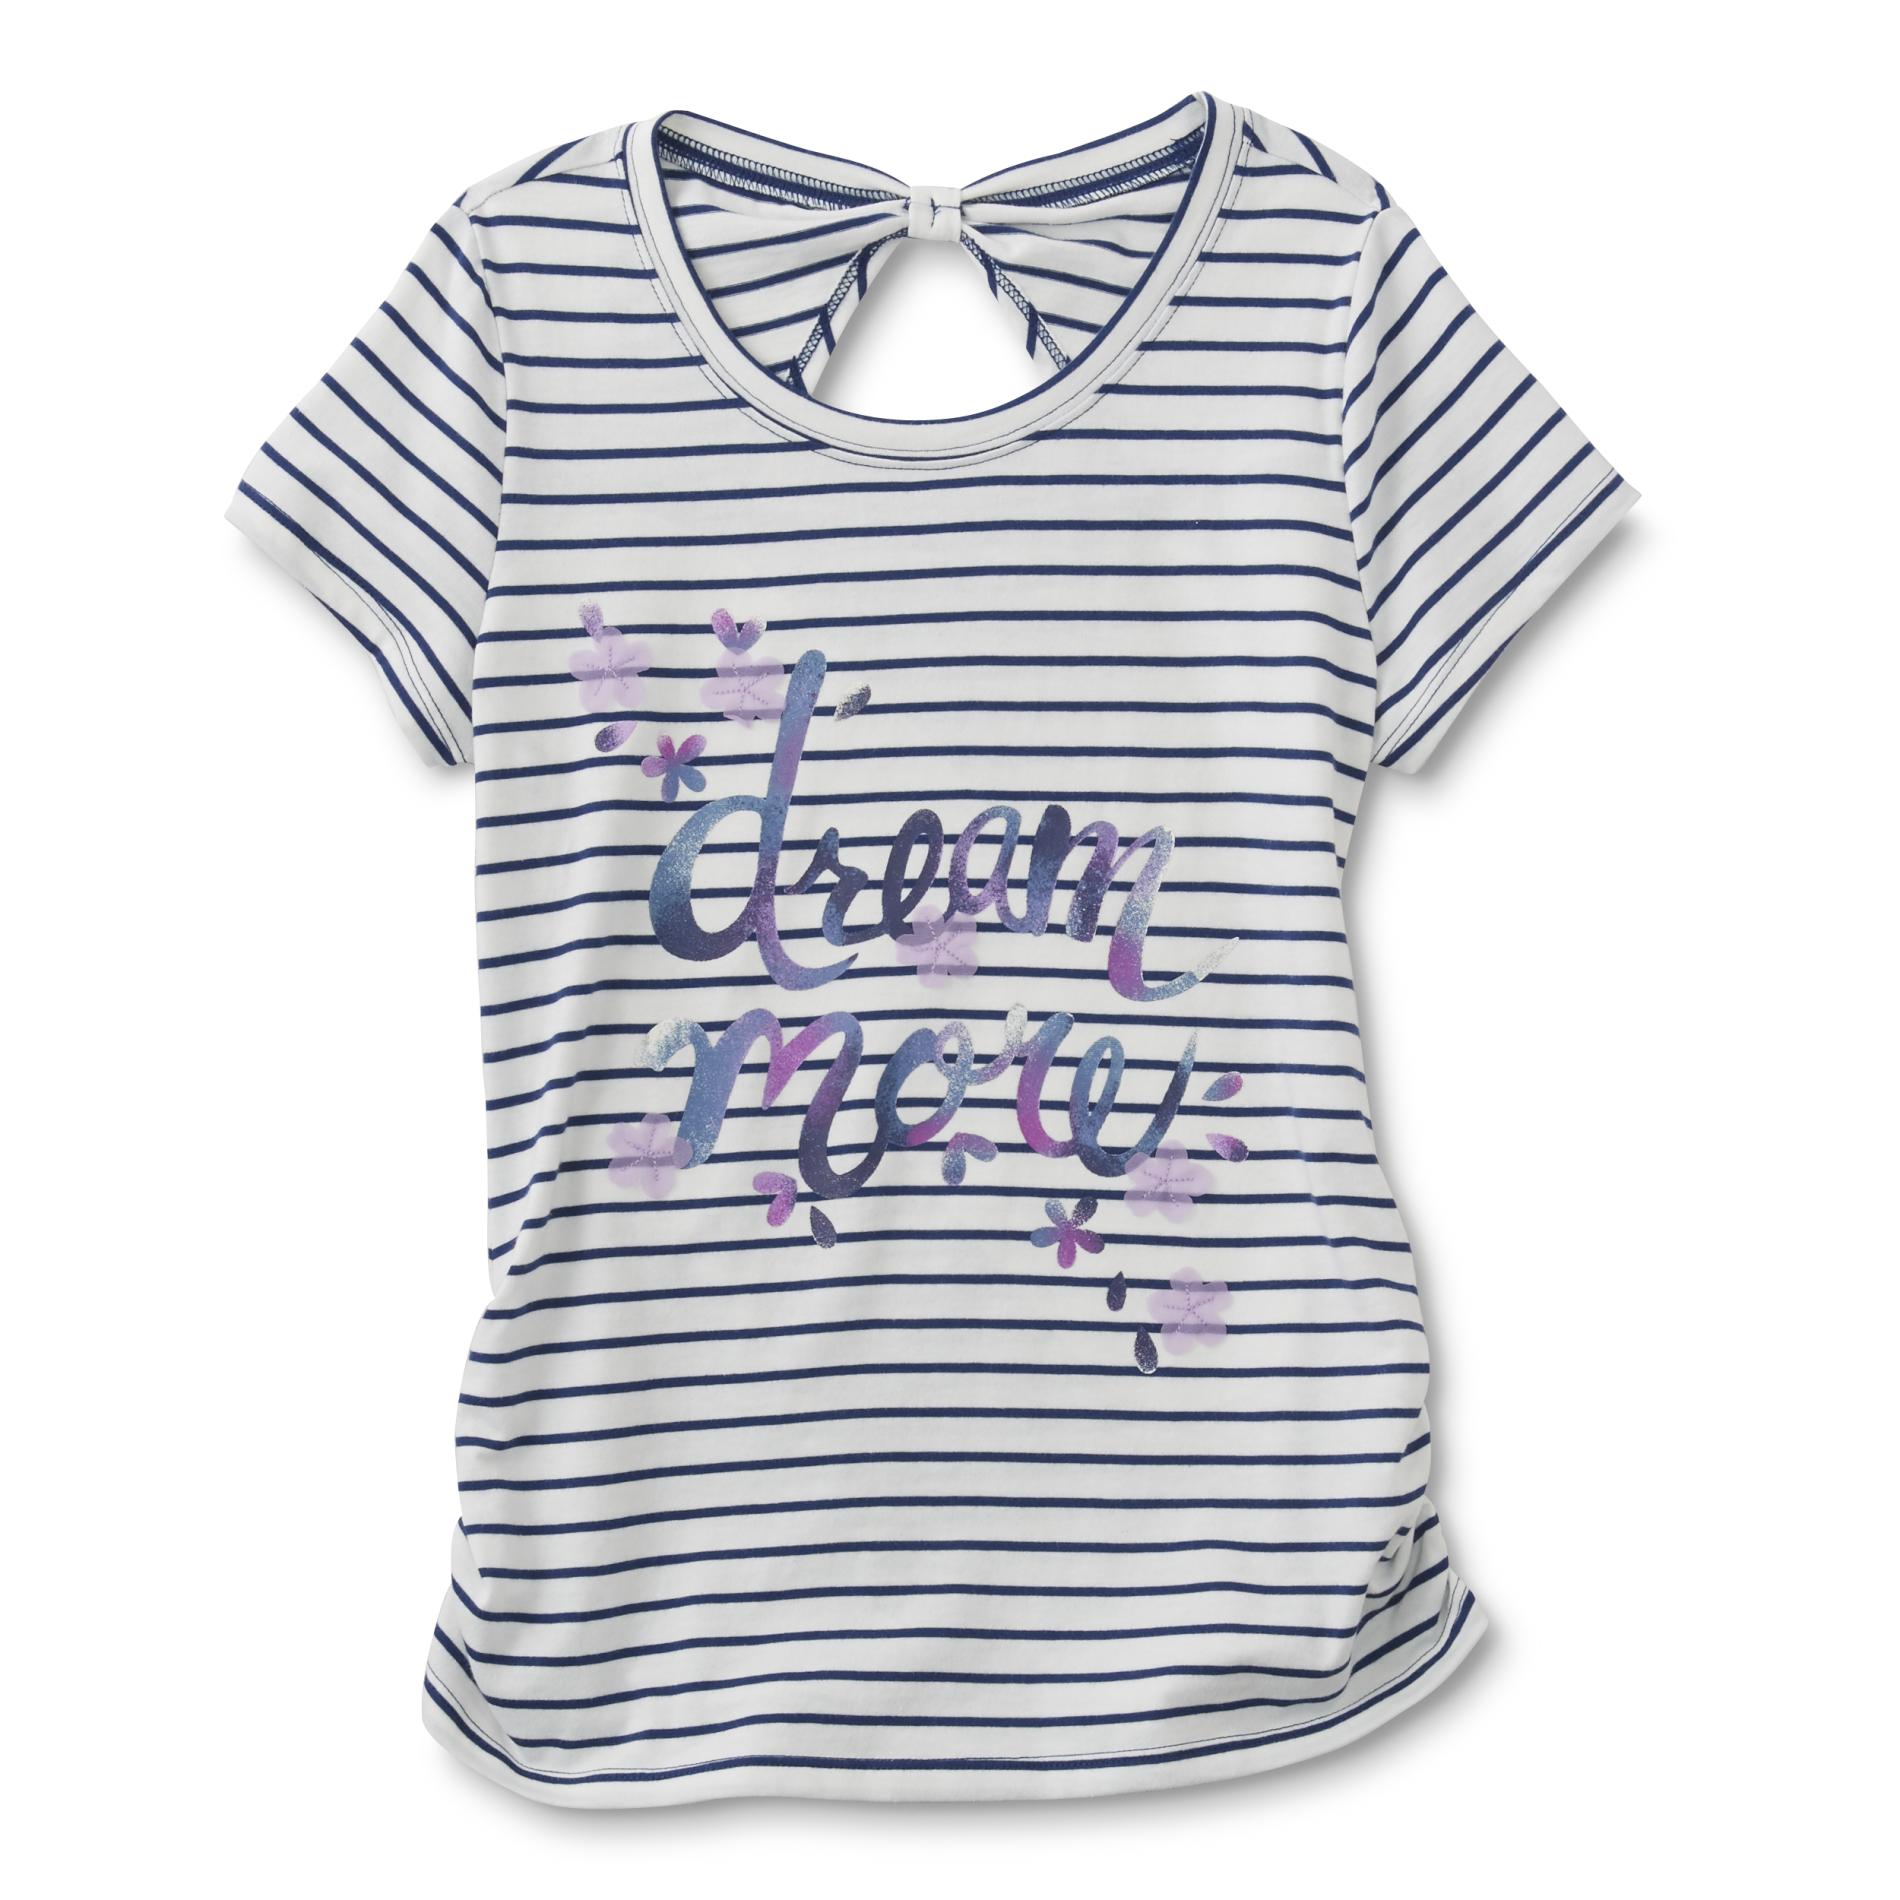 Canyon River Blues Girls' Bow Back Graphic Top - Striped & Dream More